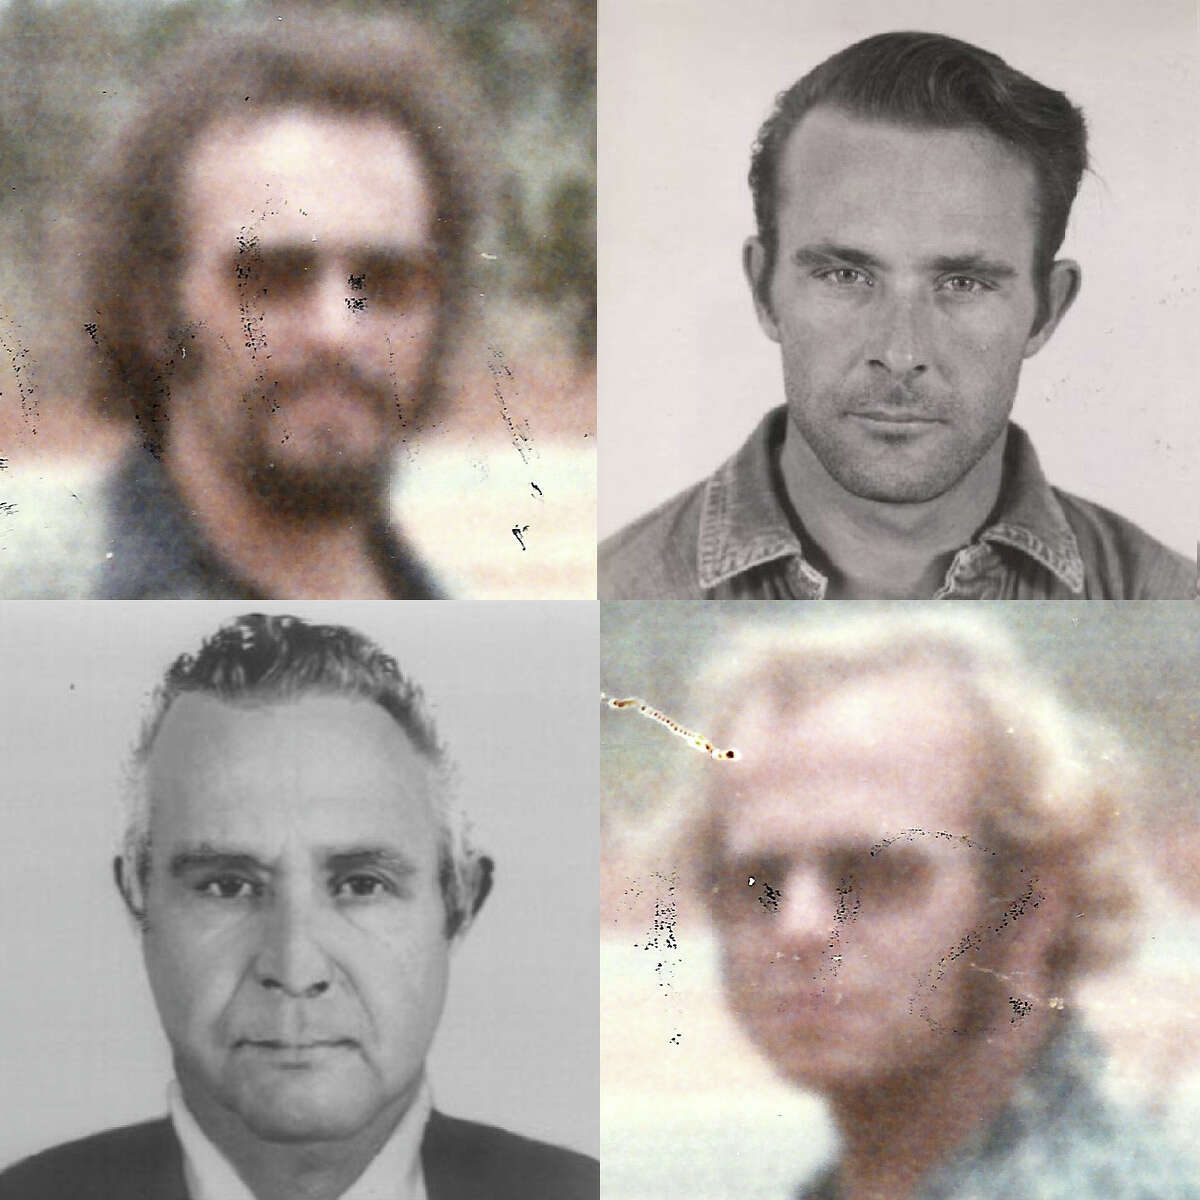 Images of John Anglin (top row) and Clarence Anglin (bottom row) from a mug shot before their 1962 from Alcatraz and one that allegedly shows John and Clarence living in Brazil in 1975.